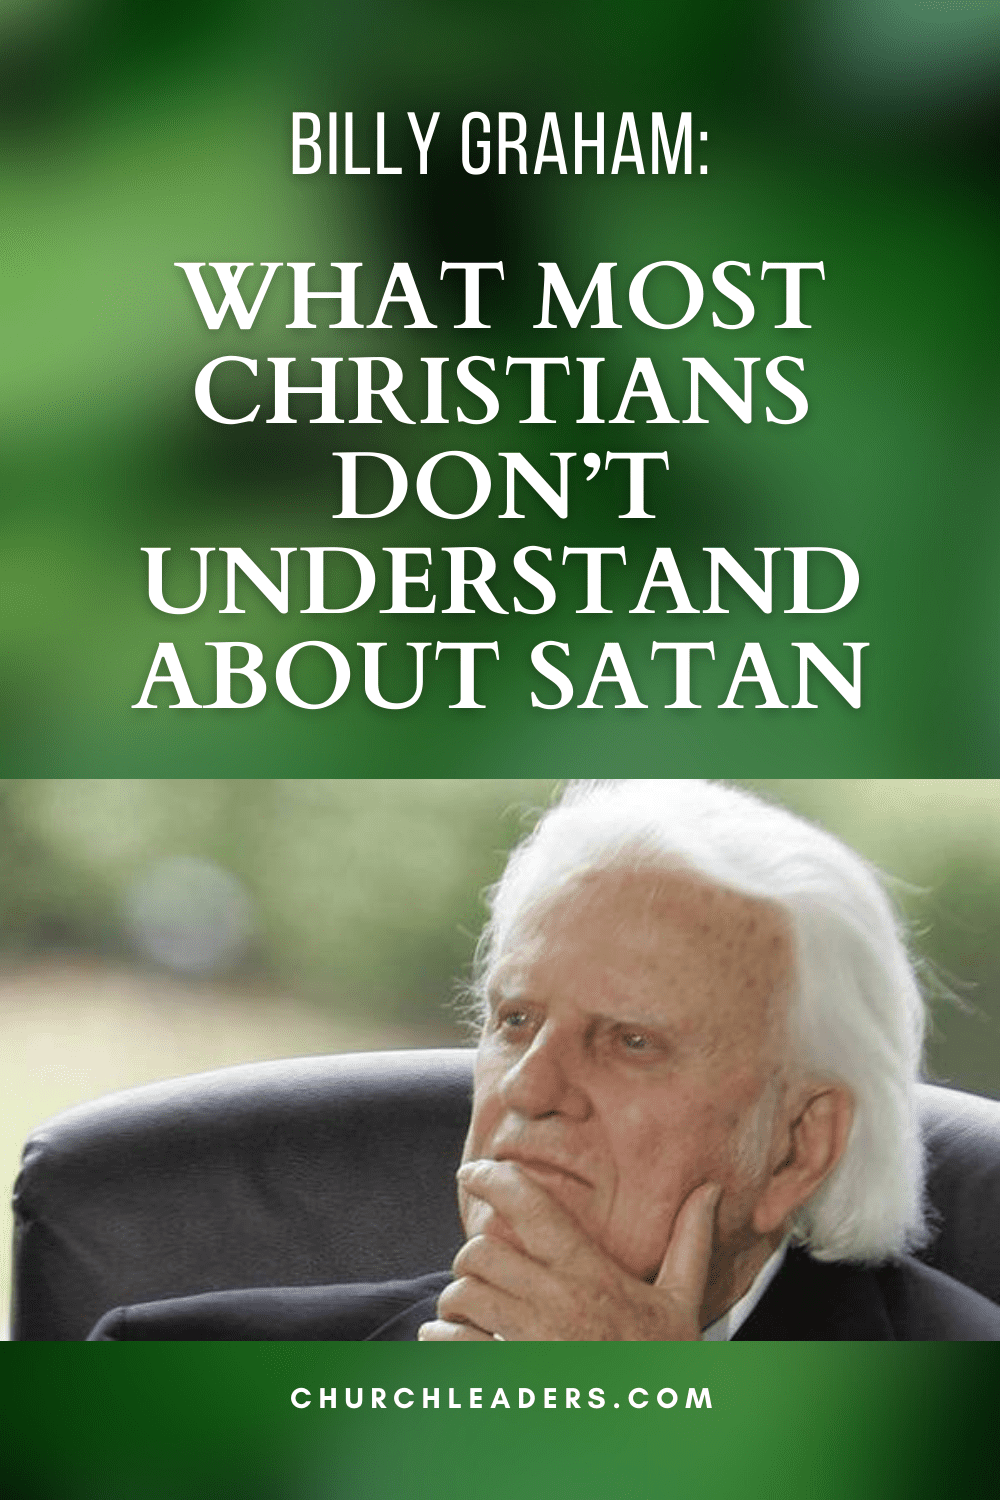 Billy Graham: The Truth About Satan Most Christians Don’t Understand